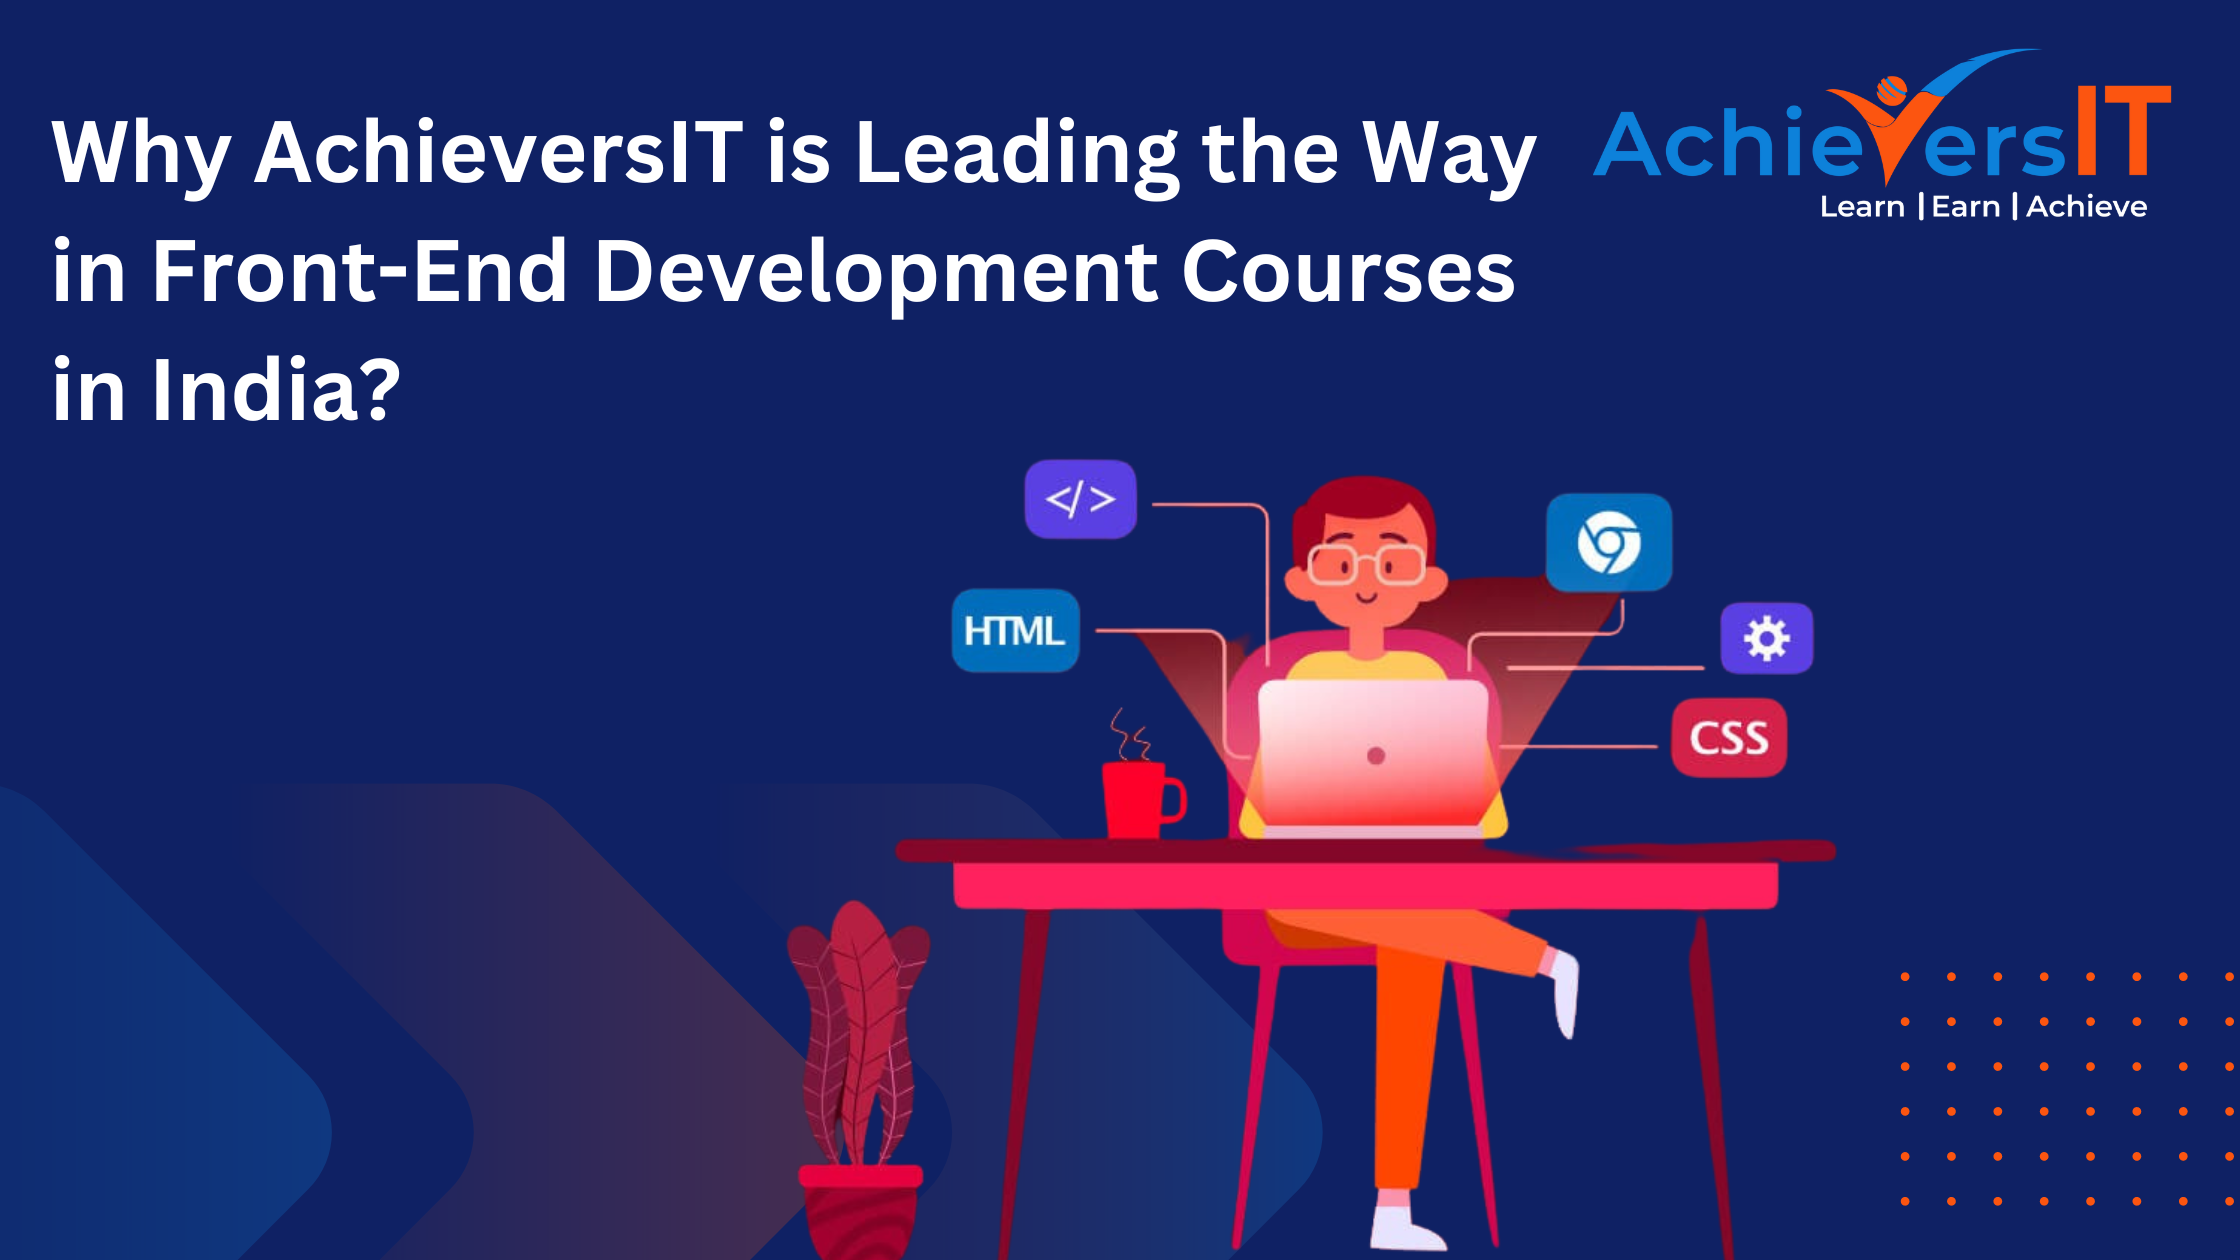 Why AchieversIT is Leading the Way in Front-End Development Courses in India?